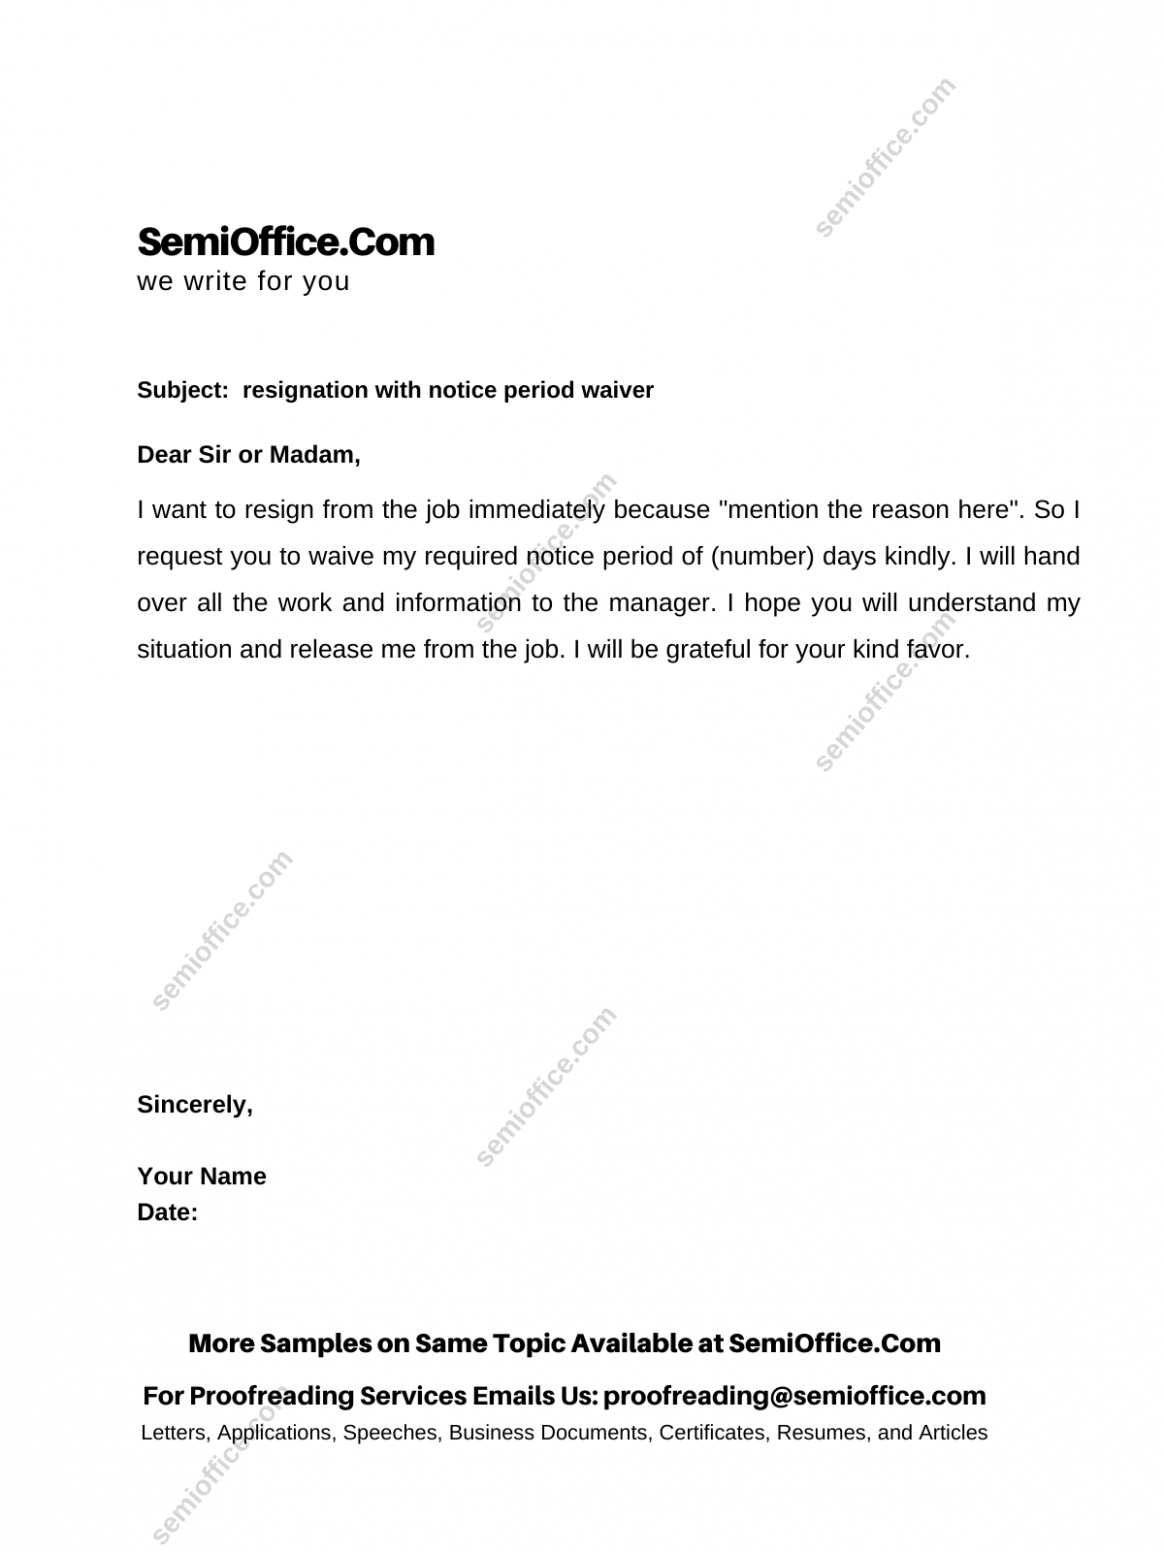  Resignation Letter Format With Notice Period PDF